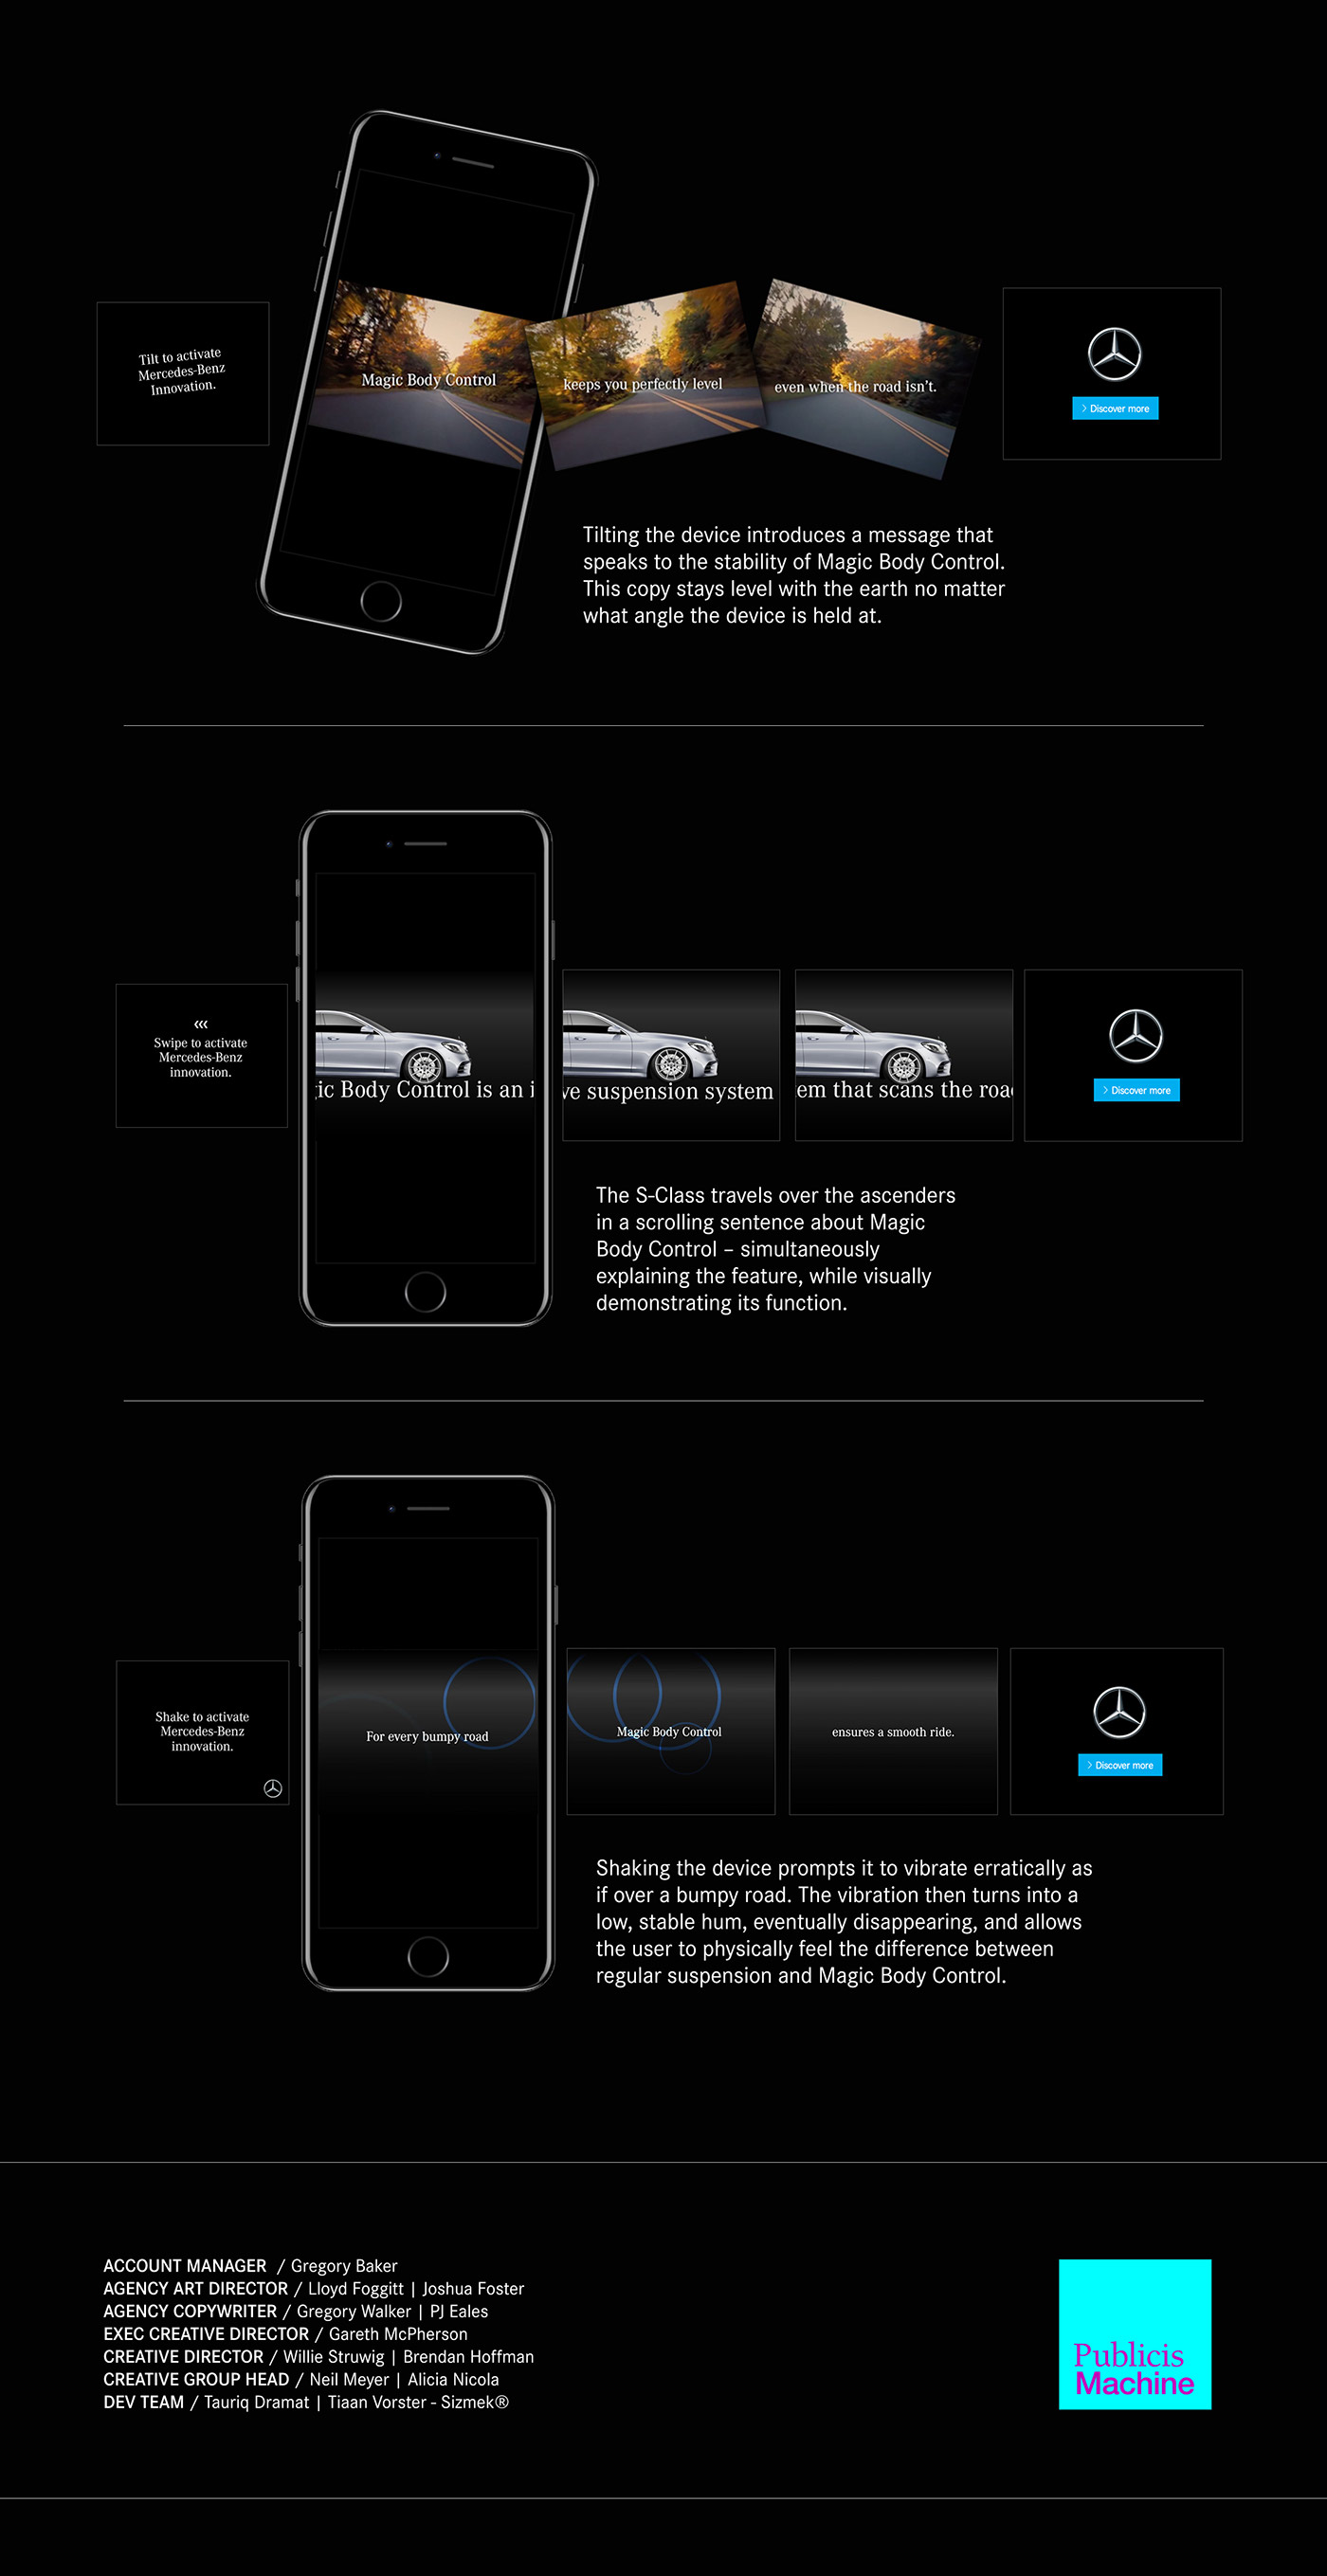 banners interactive test drive mobile smartphone ux/ui control Experience digital mercedes-benz